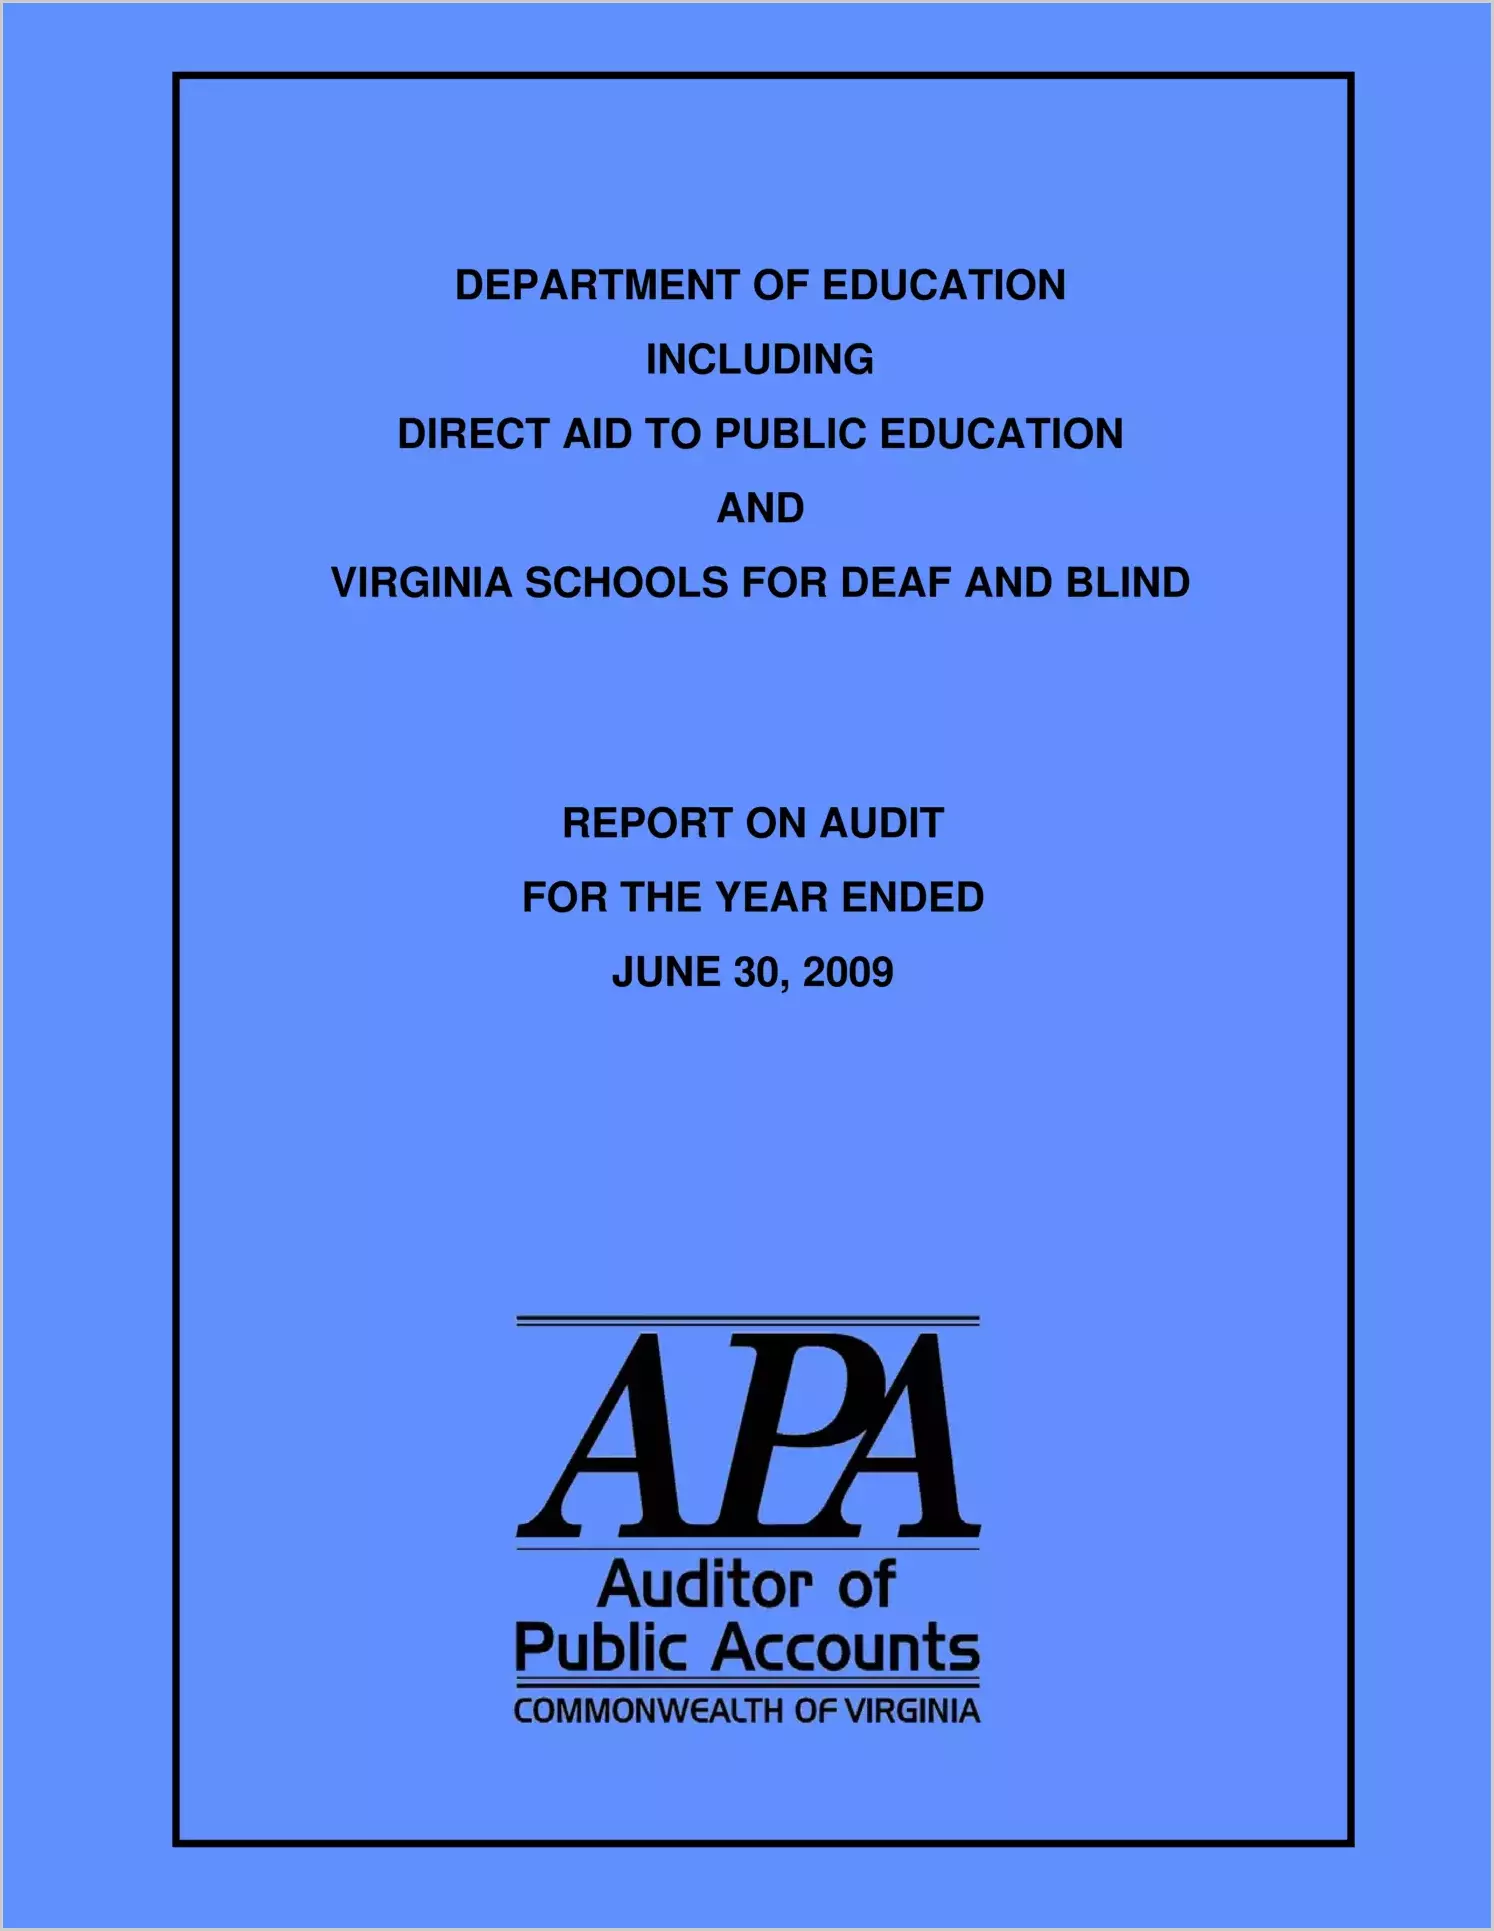 Department of Education Including Direct Aid to Public Education and  Virginia Schools for the Deaf and Blind for the year ended June 30, 2009